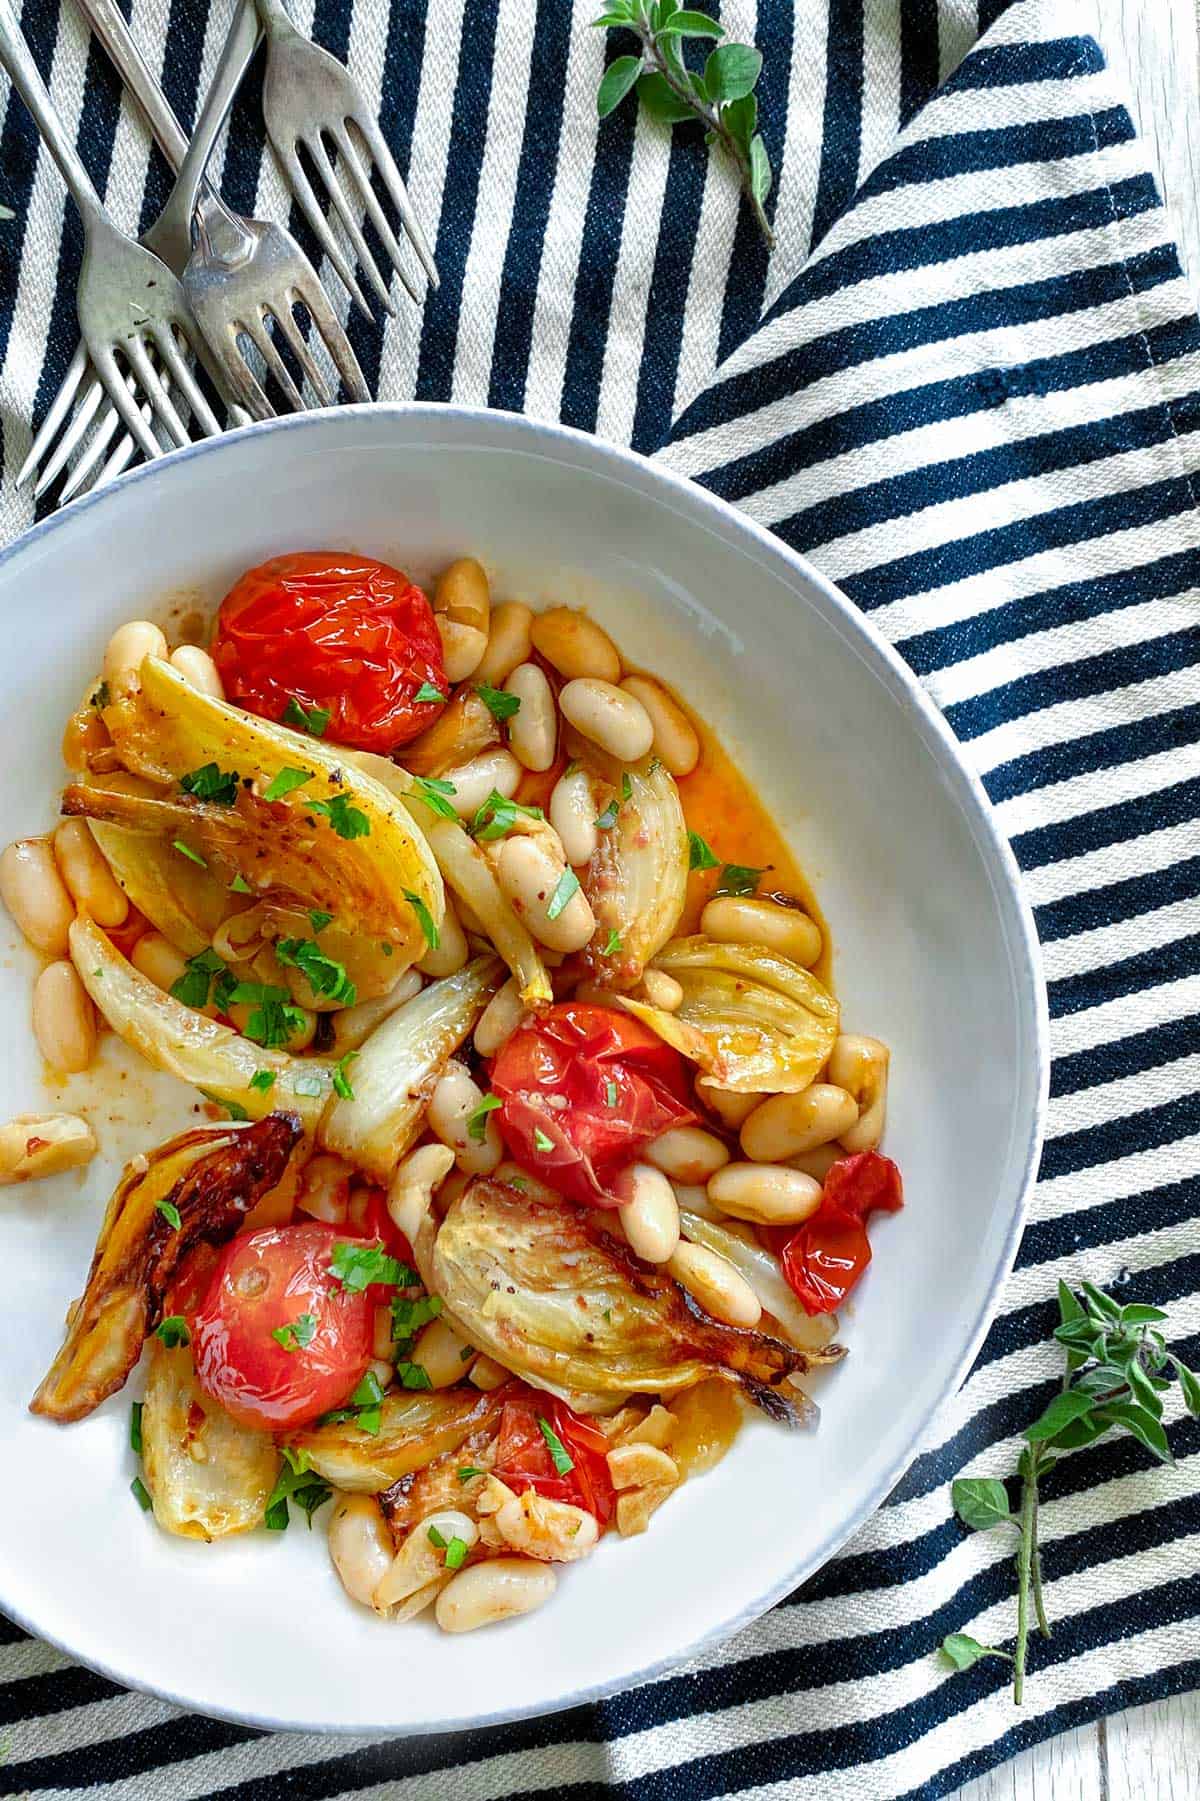 white bowl on a black and white striped dish towel, filled with roasted fennel, cherry tomatoes and white beans